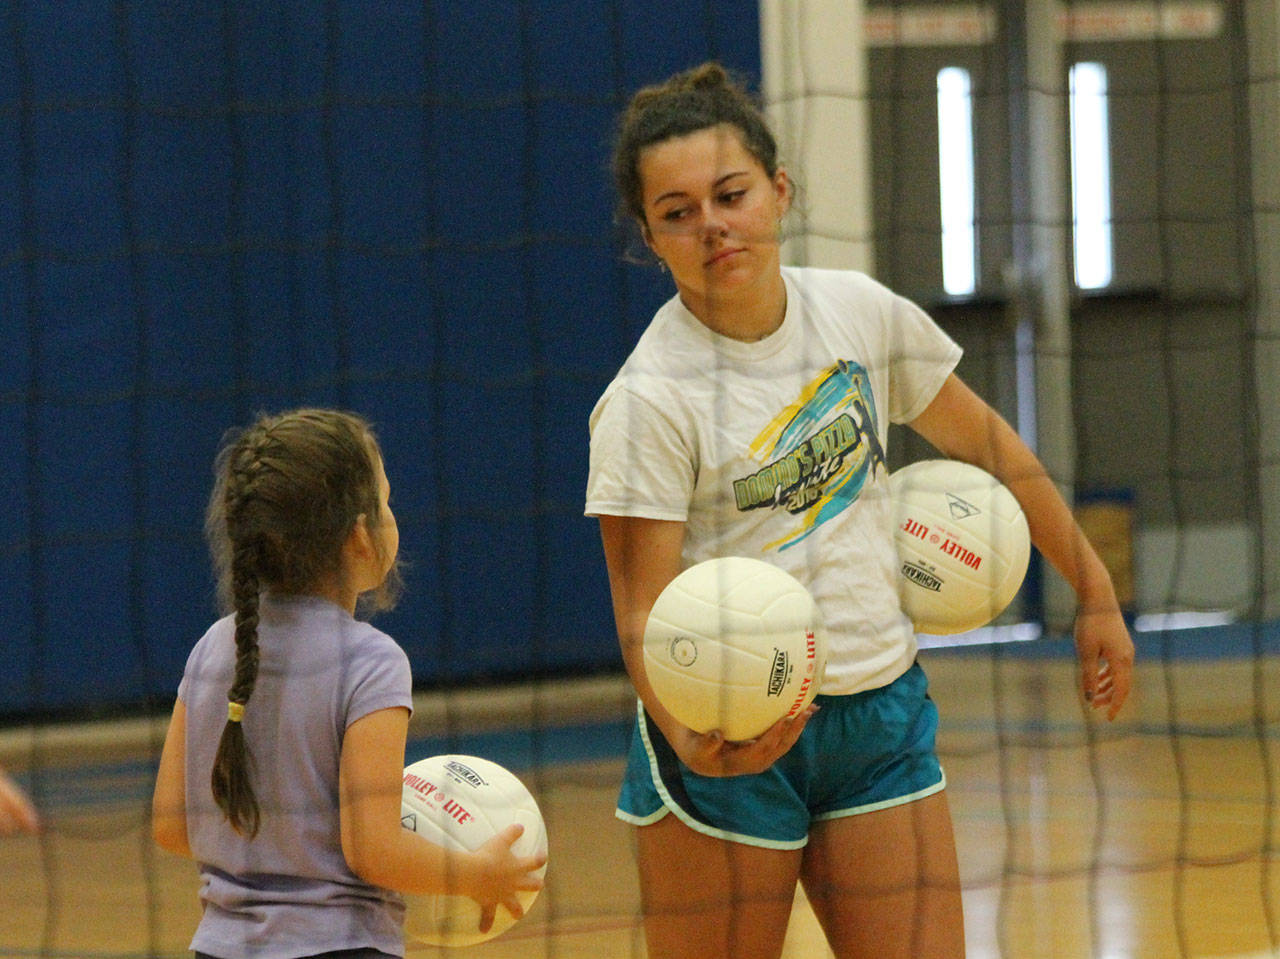 Eleida Bonnell, left, asks assistant coach Angelina Wilson a question at volleyball camp this week.(Photo by Jim Waller/South Whidbey Record)